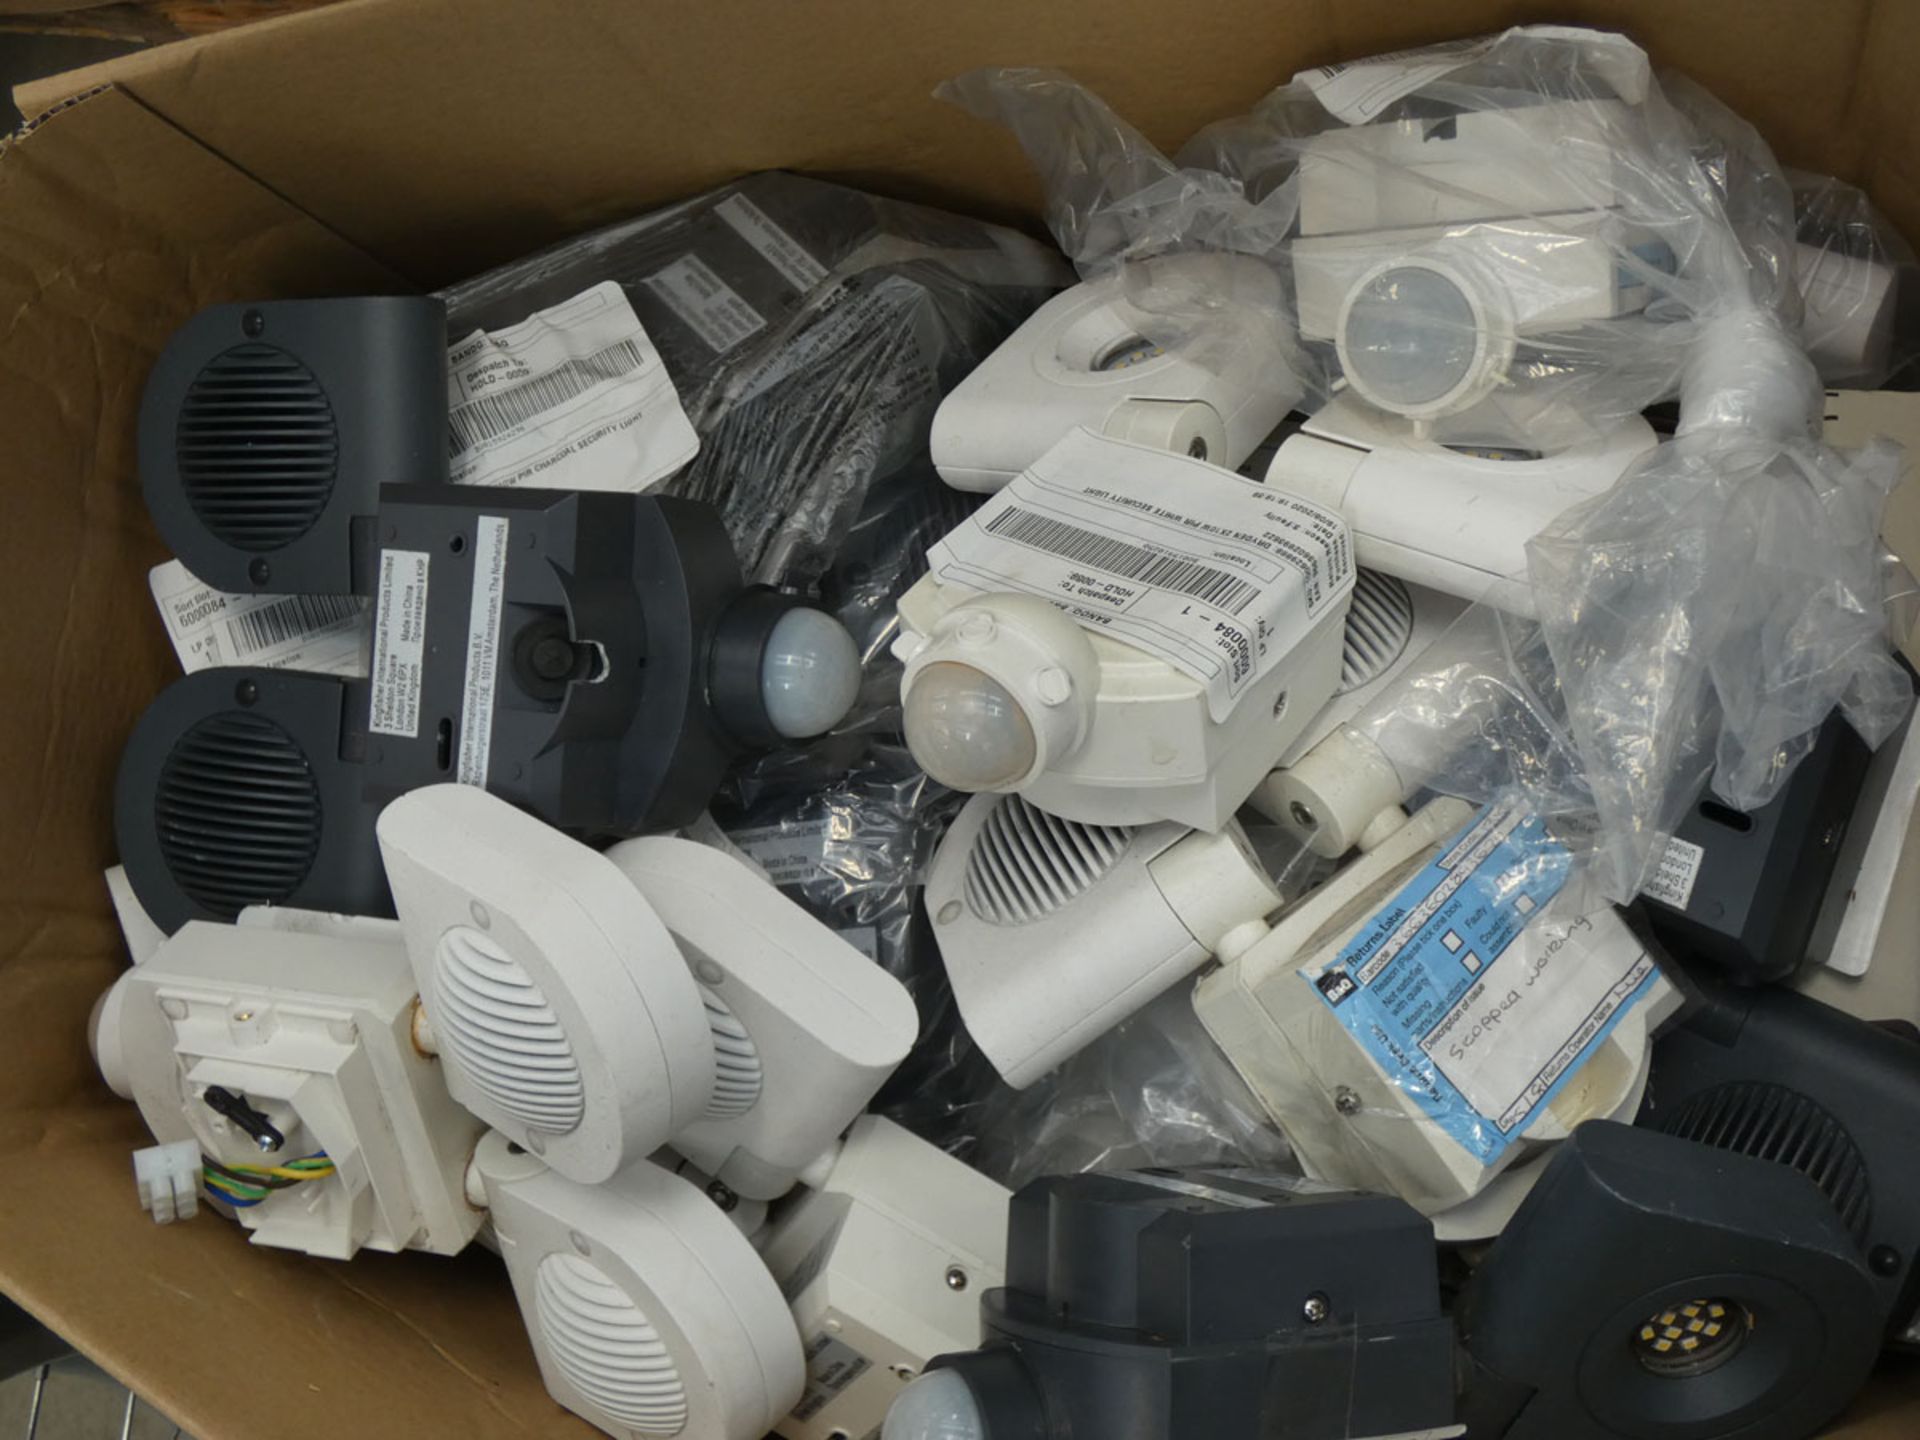 Box of Twin security lights